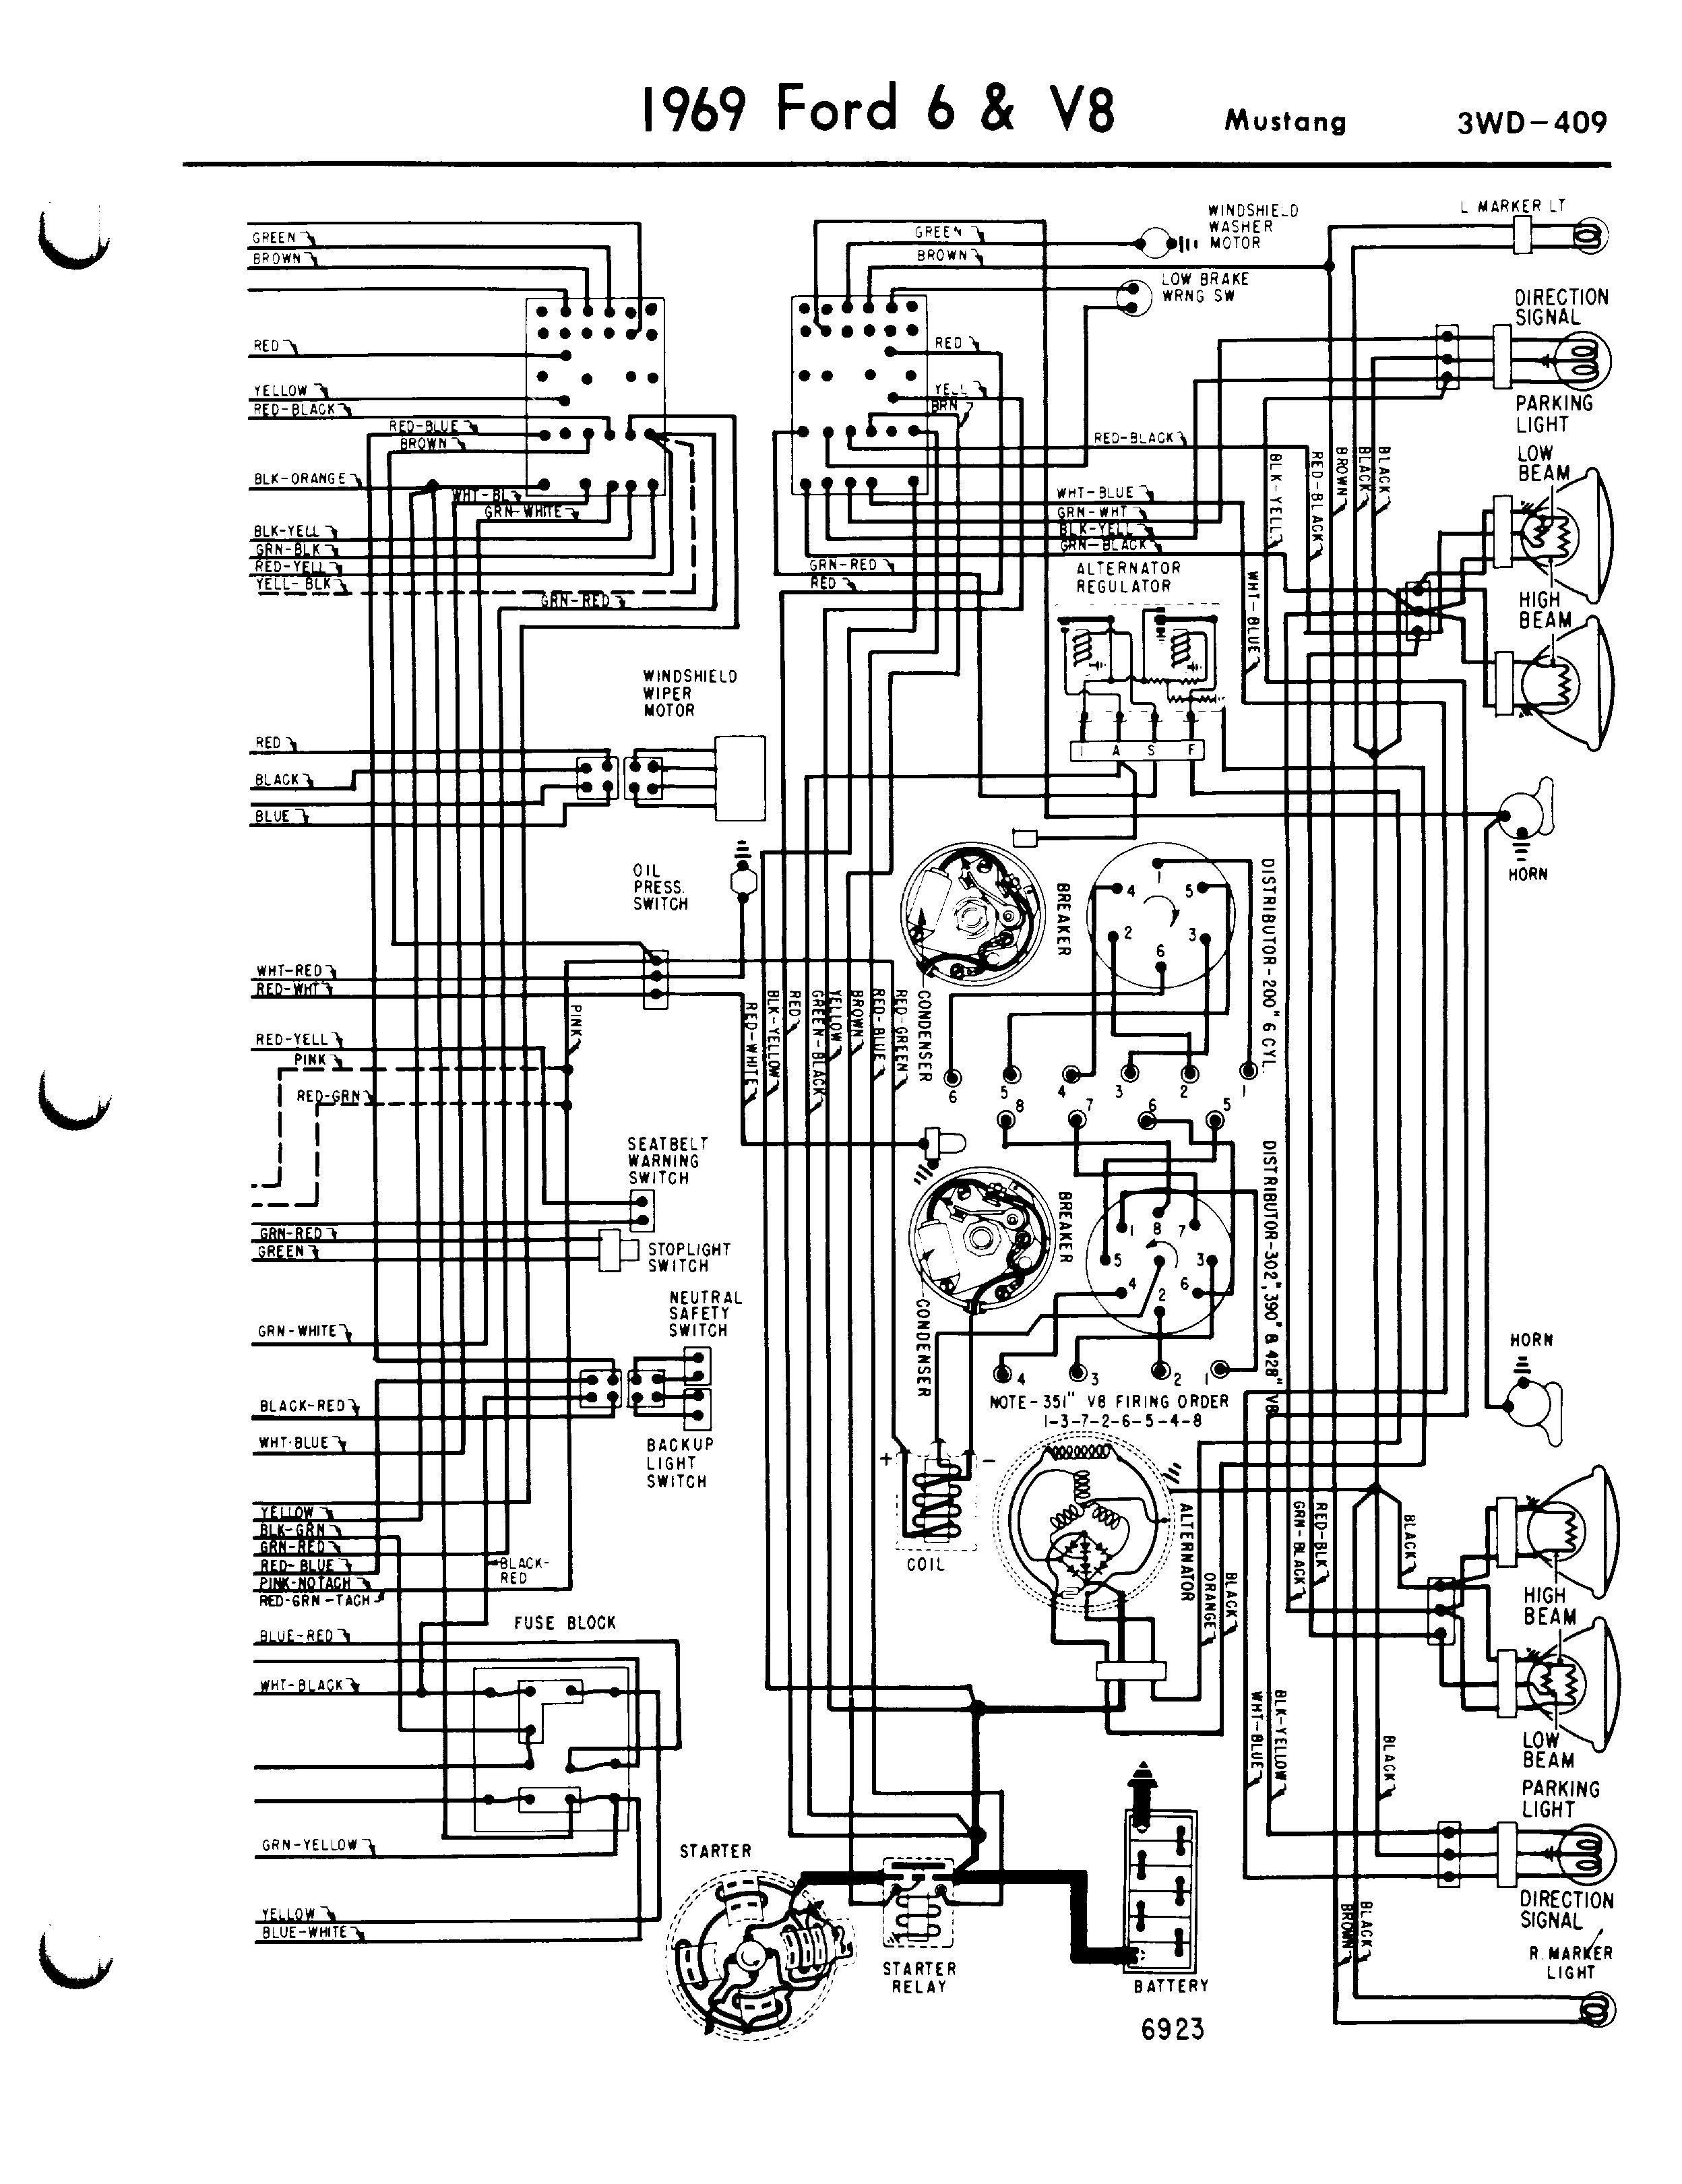 Ford Diagrams With Mustang Wiring Diagram